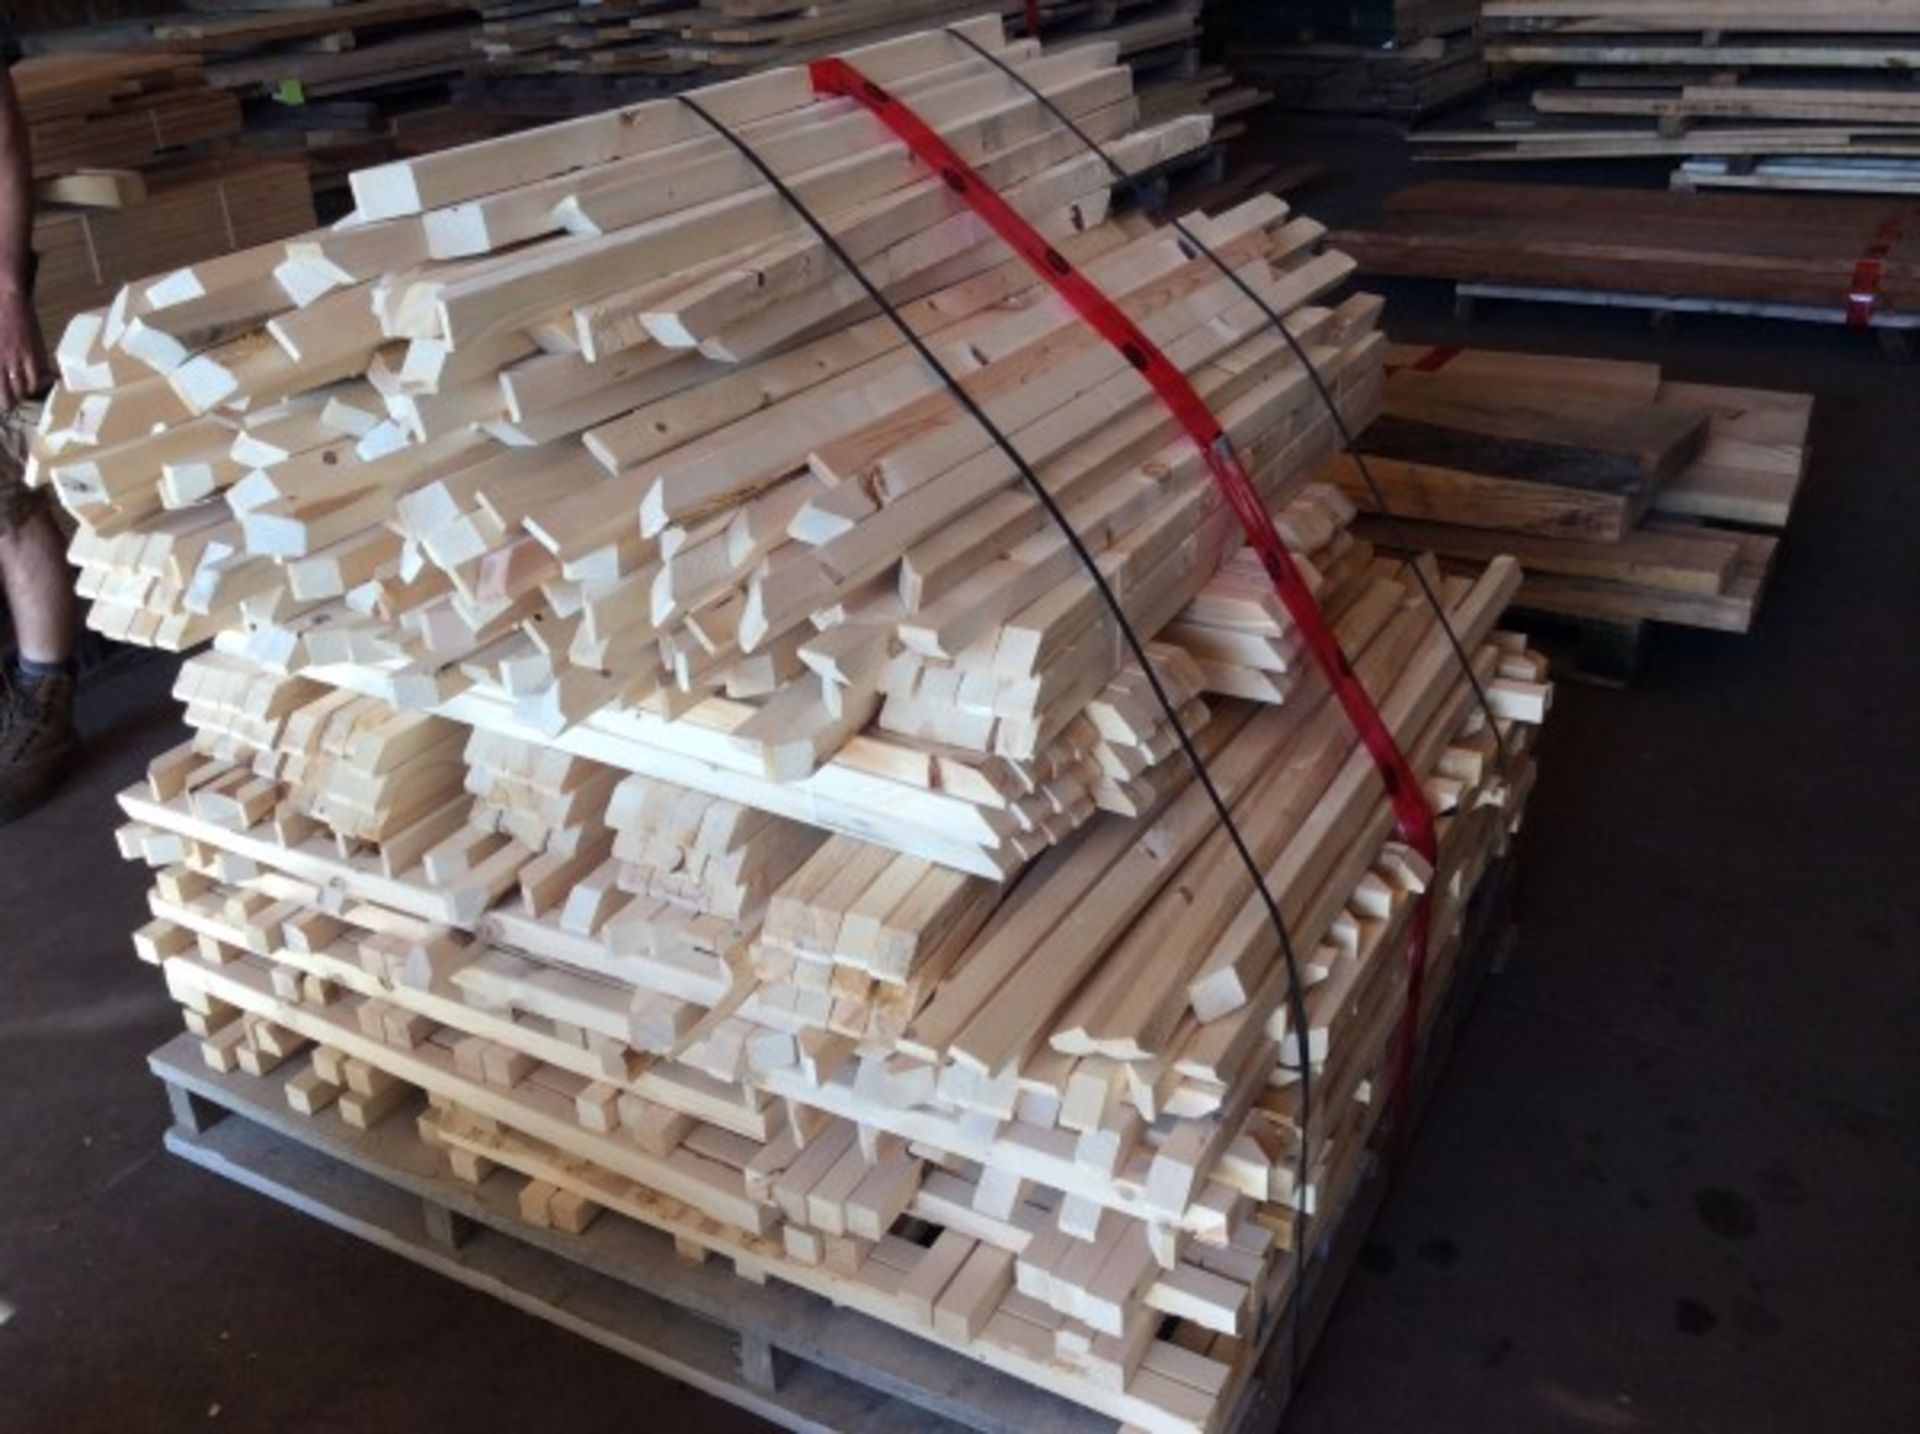 SKID OF 1 1/2" x 1 1/2" SOFTWOOD PICKETS - APPROX 300 PCS